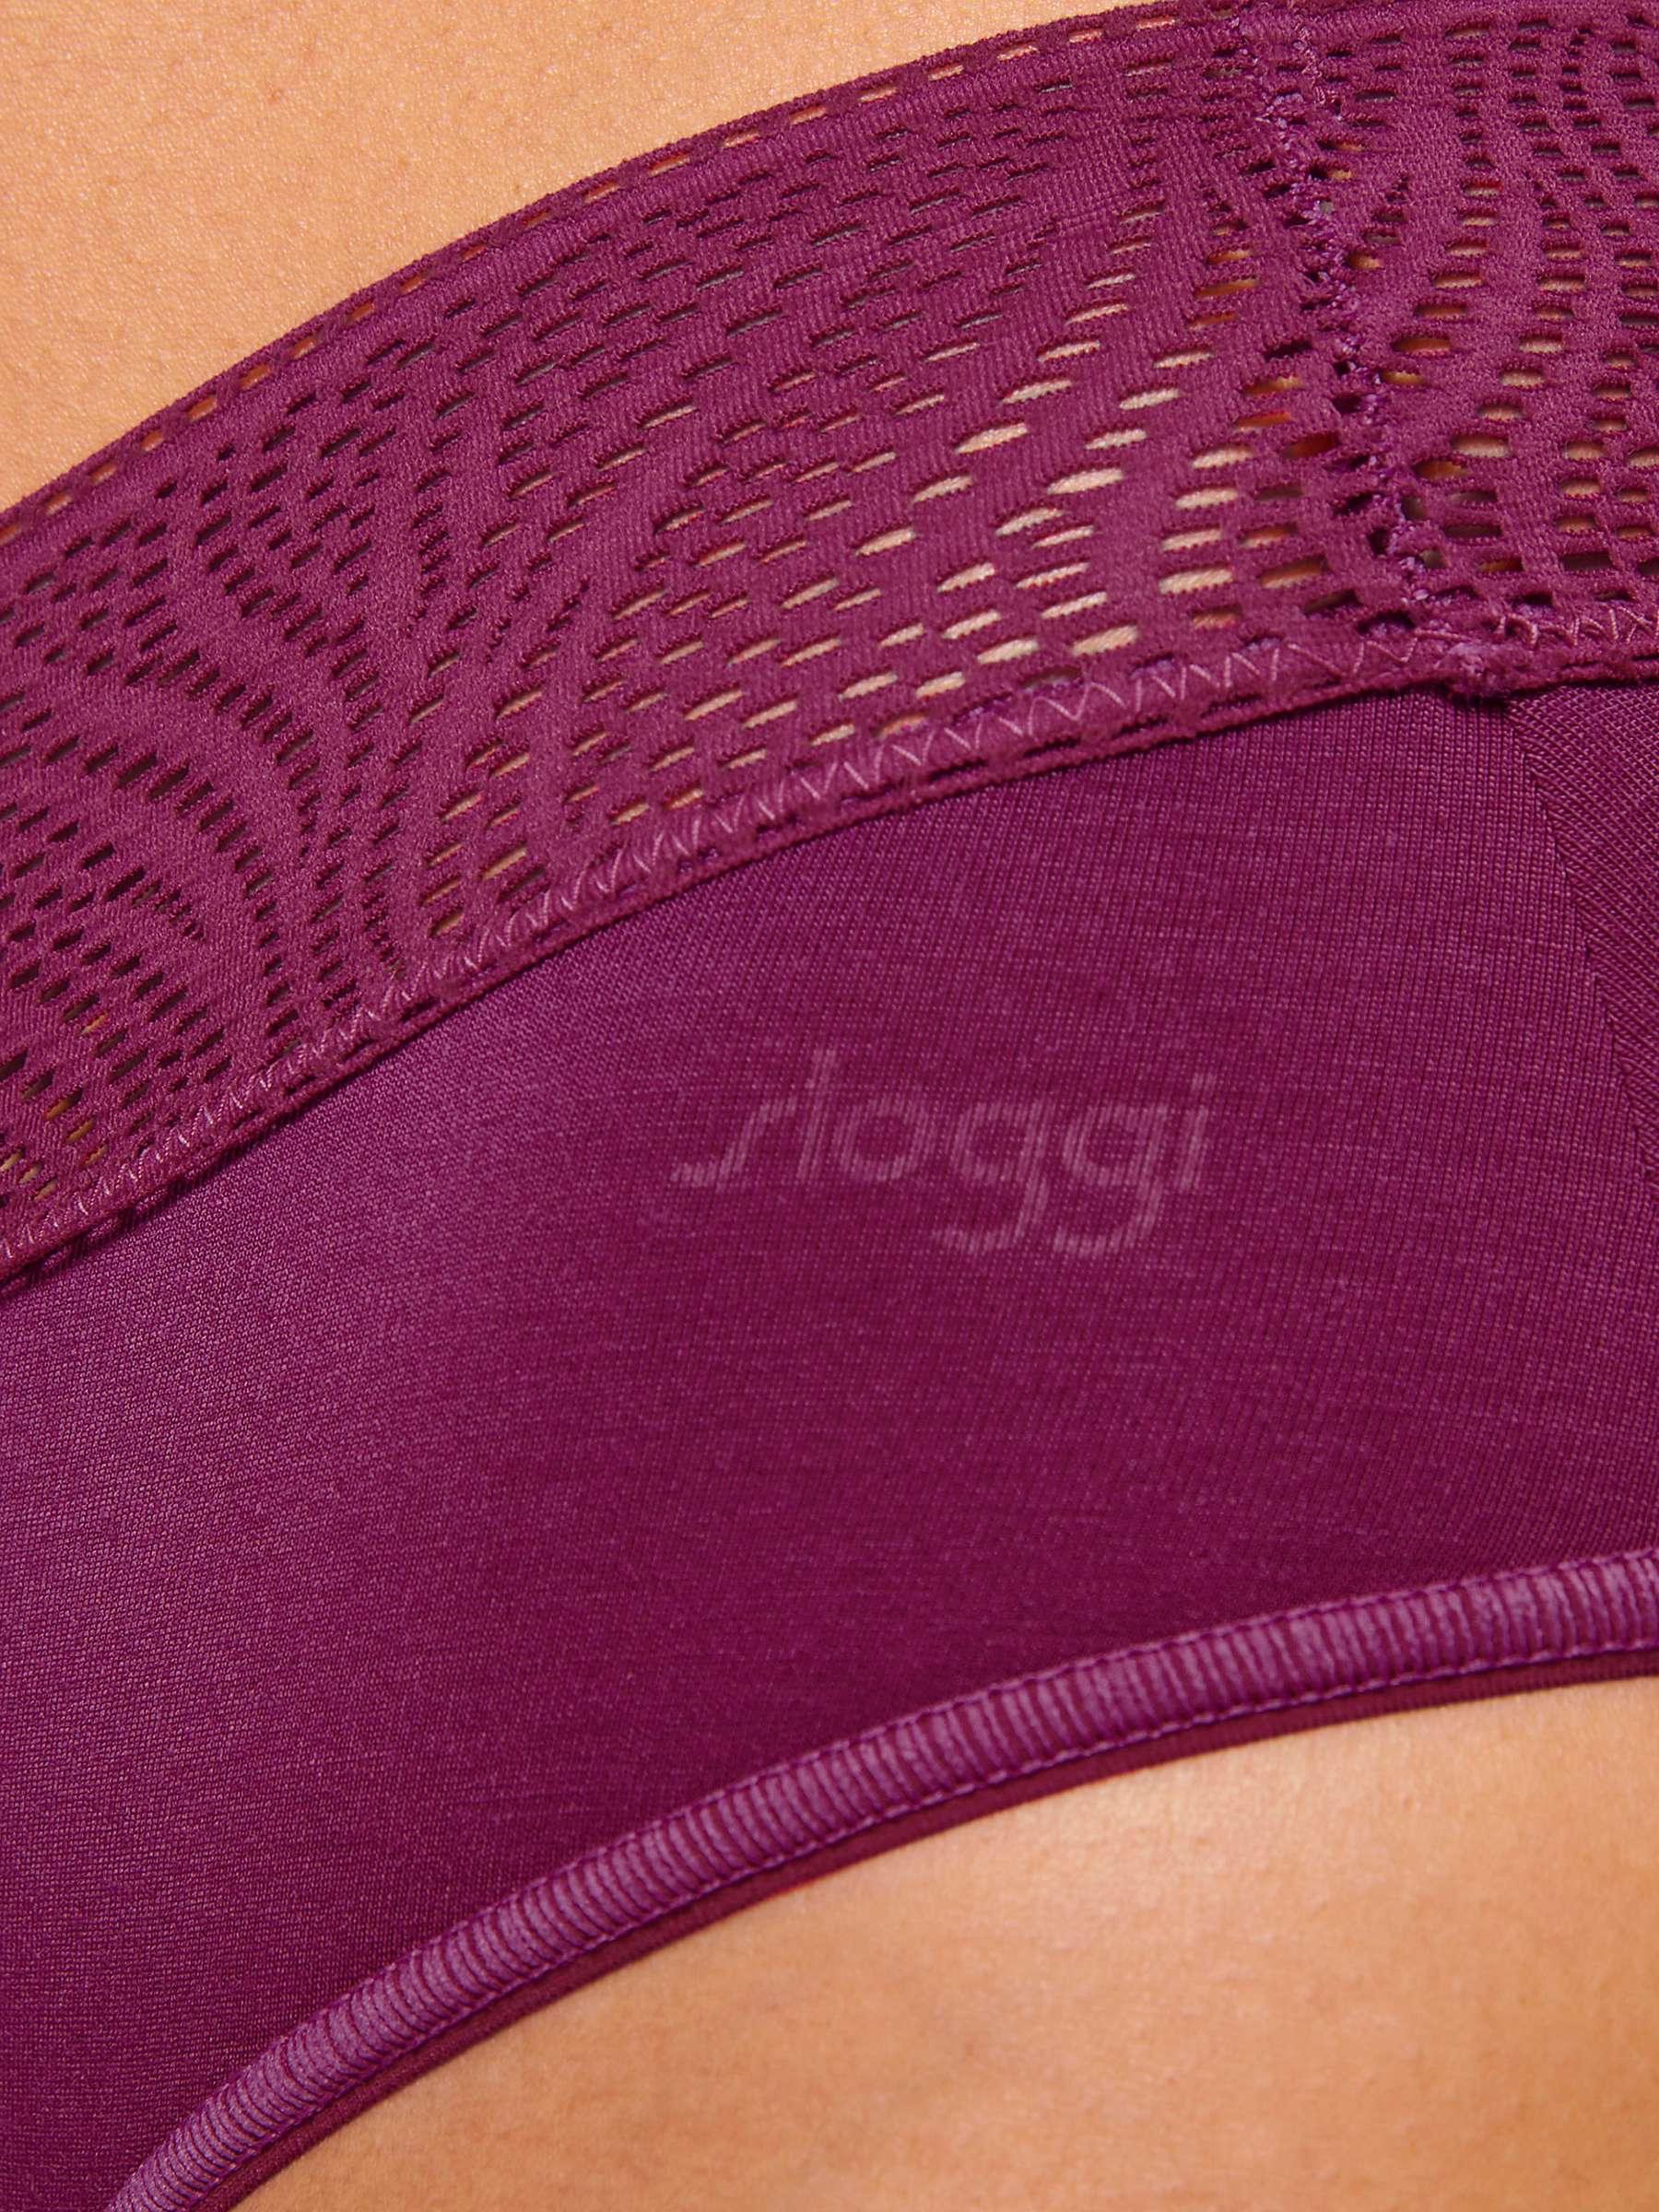 Buy sloggi Medium Absorbency Hipster Period Knickers, Pack of 2 Online at johnlewis.com